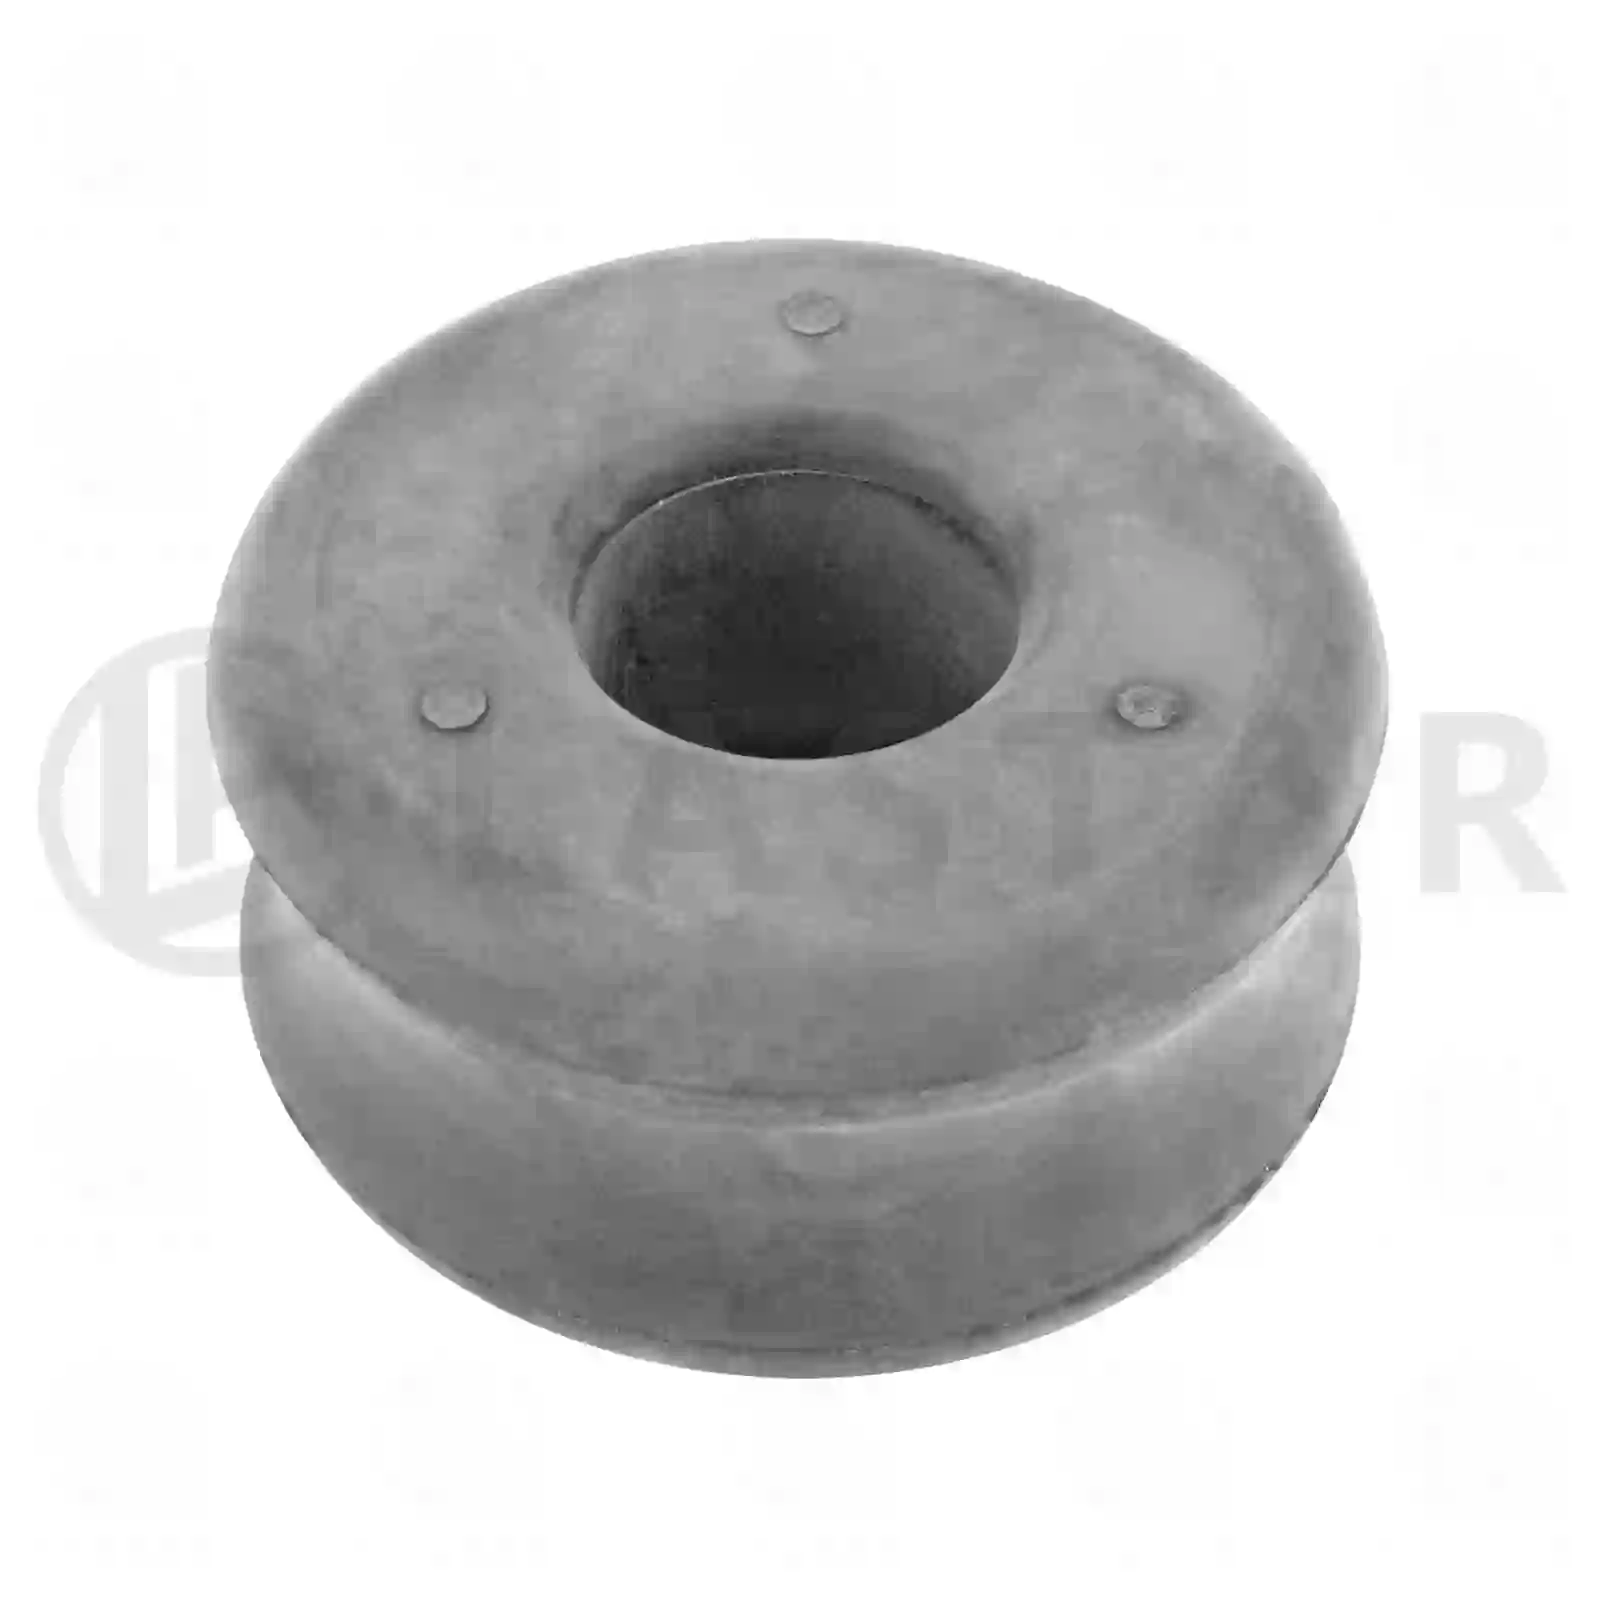 Rubber bushing, shock absorber, 77728579, 0697704, 697704, 1699143 ||  77728579 Lastar Spare Part | Truck Spare Parts, Auotomotive Spare Parts Rubber bushing, shock absorber, 77728579, 0697704, 697704, 1699143 ||  77728579 Lastar Spare Part | Truck Spare Parts, Auotomotive Spare Parts